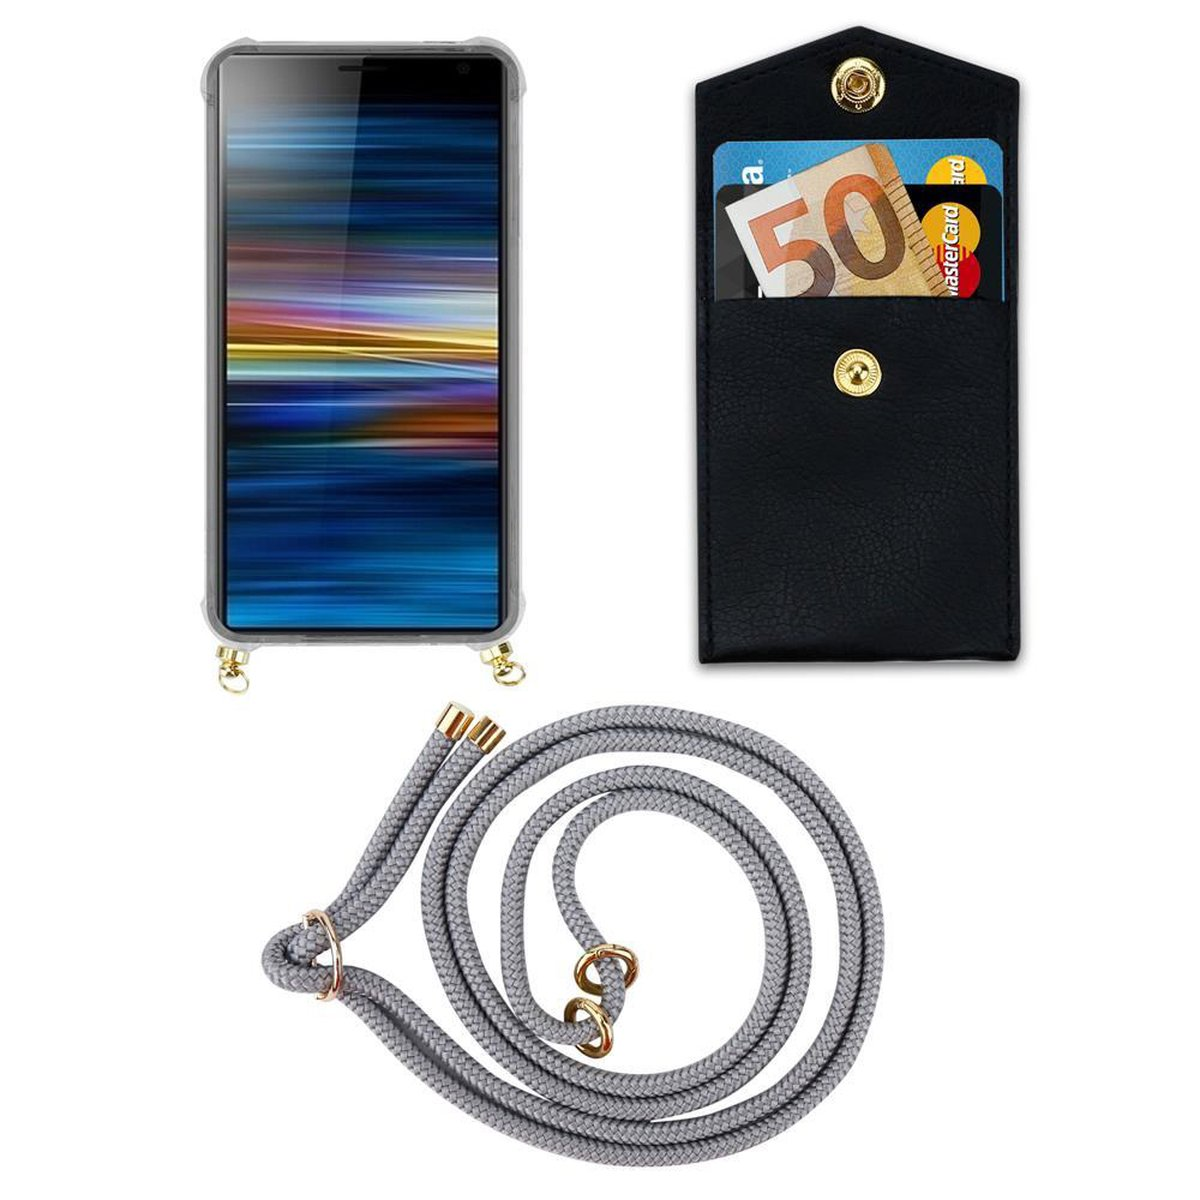 Hülle, Band Sony, abnehmbarer Backcover, Ringen, Gold Xperia 10 PLUS, Kordel SILBER mit CADORABO GRAU und Handy Kette